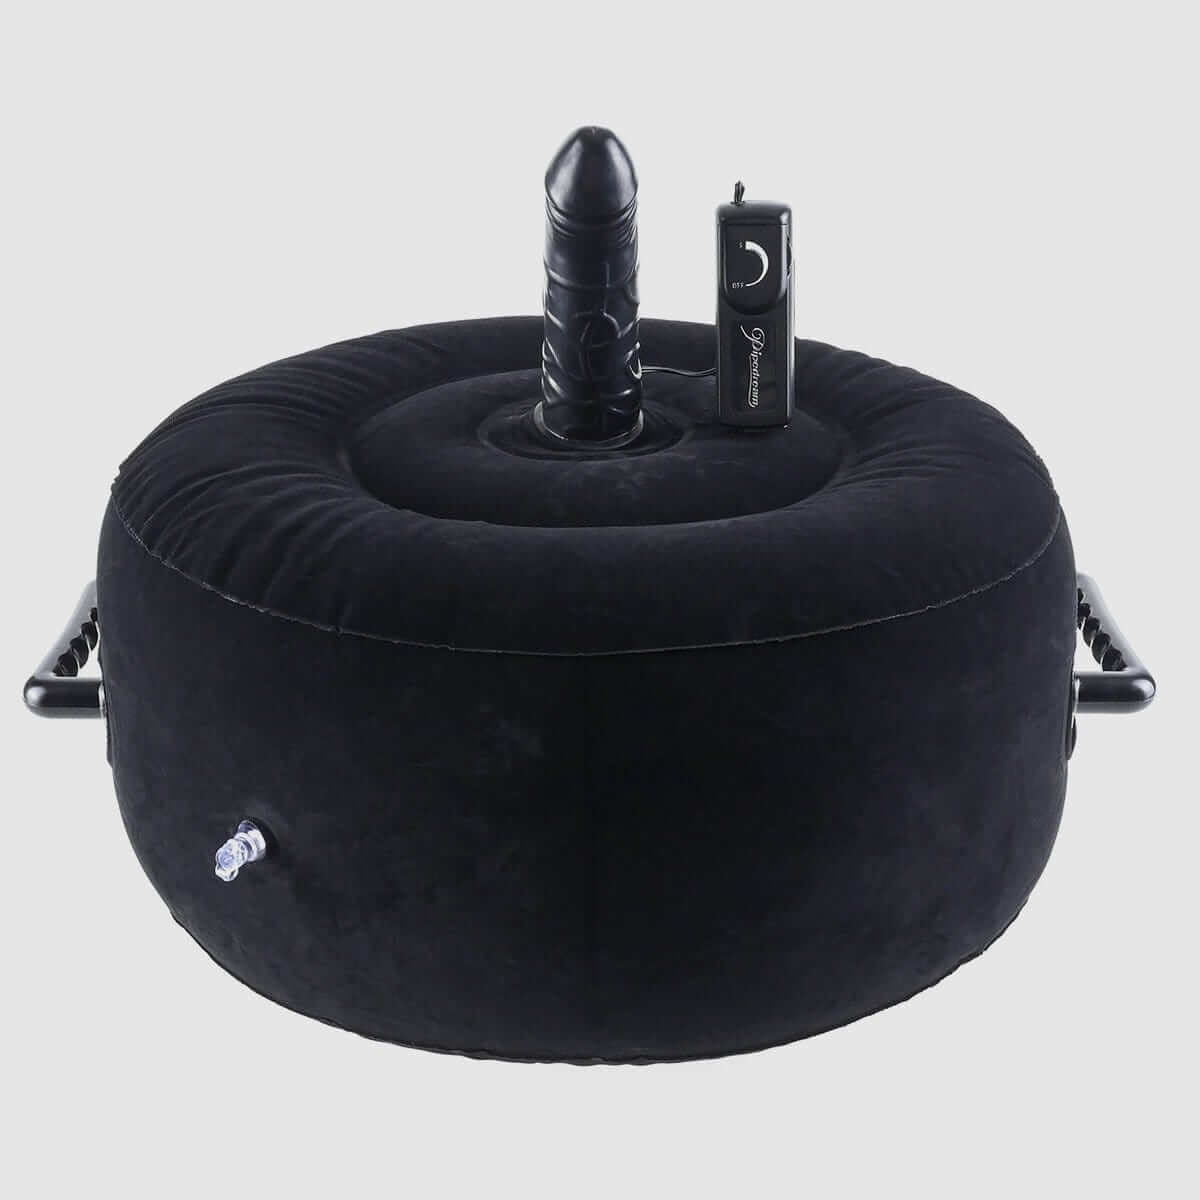 Fetish Fantasy Series Inflatable Hot Seat - Black - Thorn & Feather